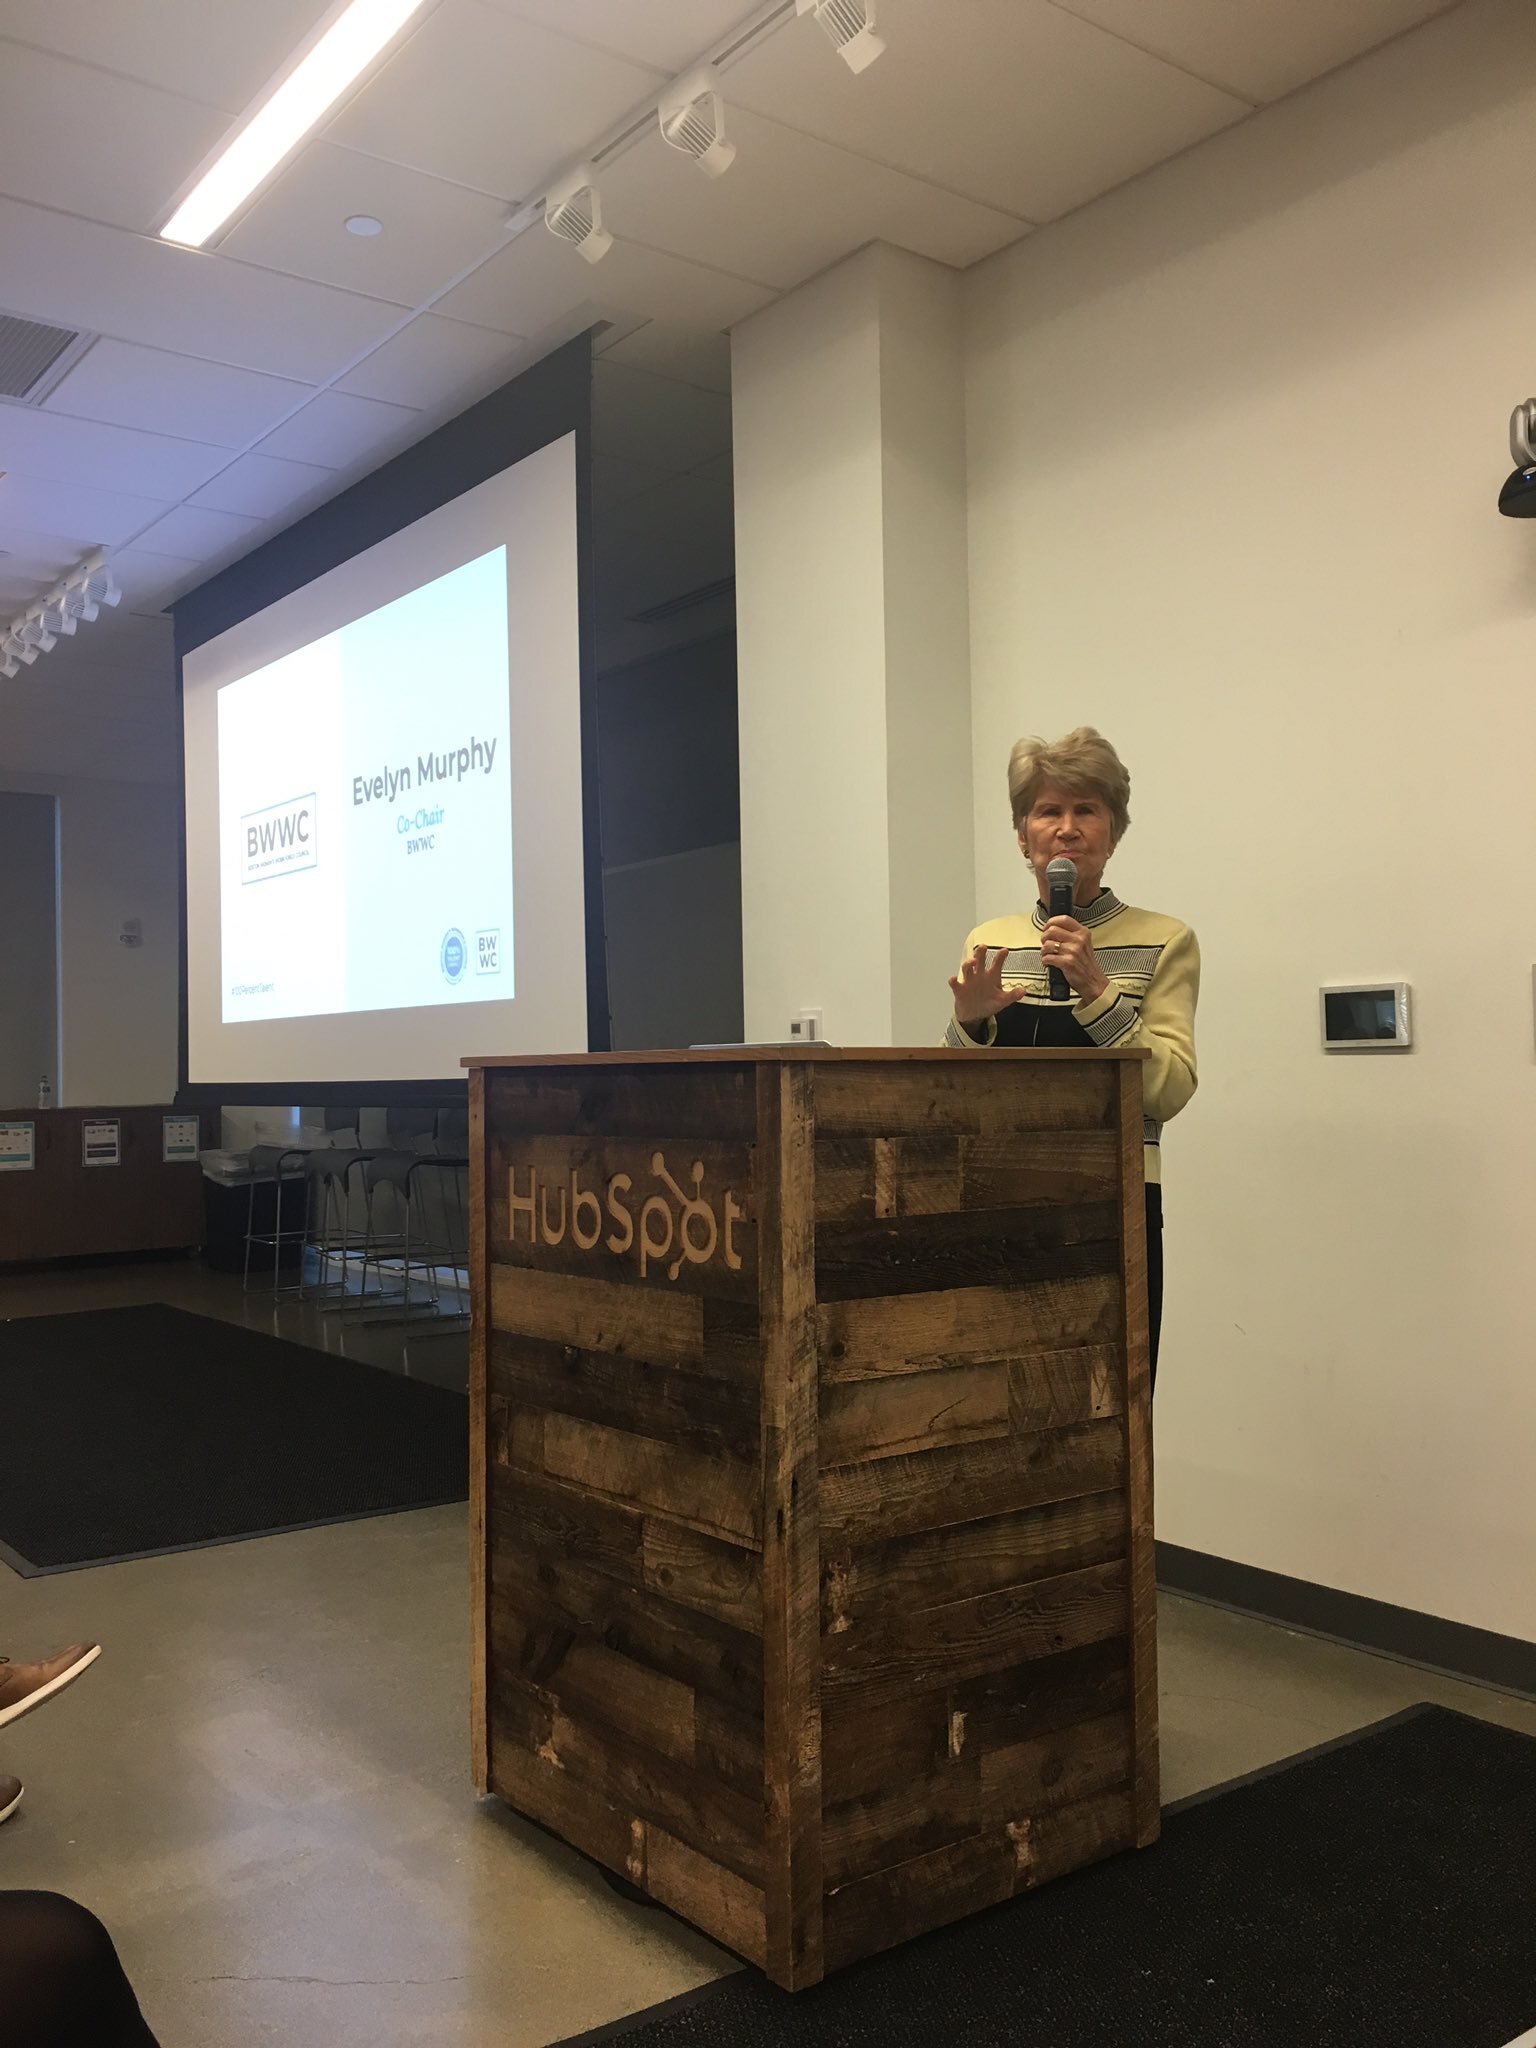 BWWC Co-Chair, Evelyn Murphy, introduces the distinguished guest of the morning, Professor Frank Dobbin | 10.24.2019